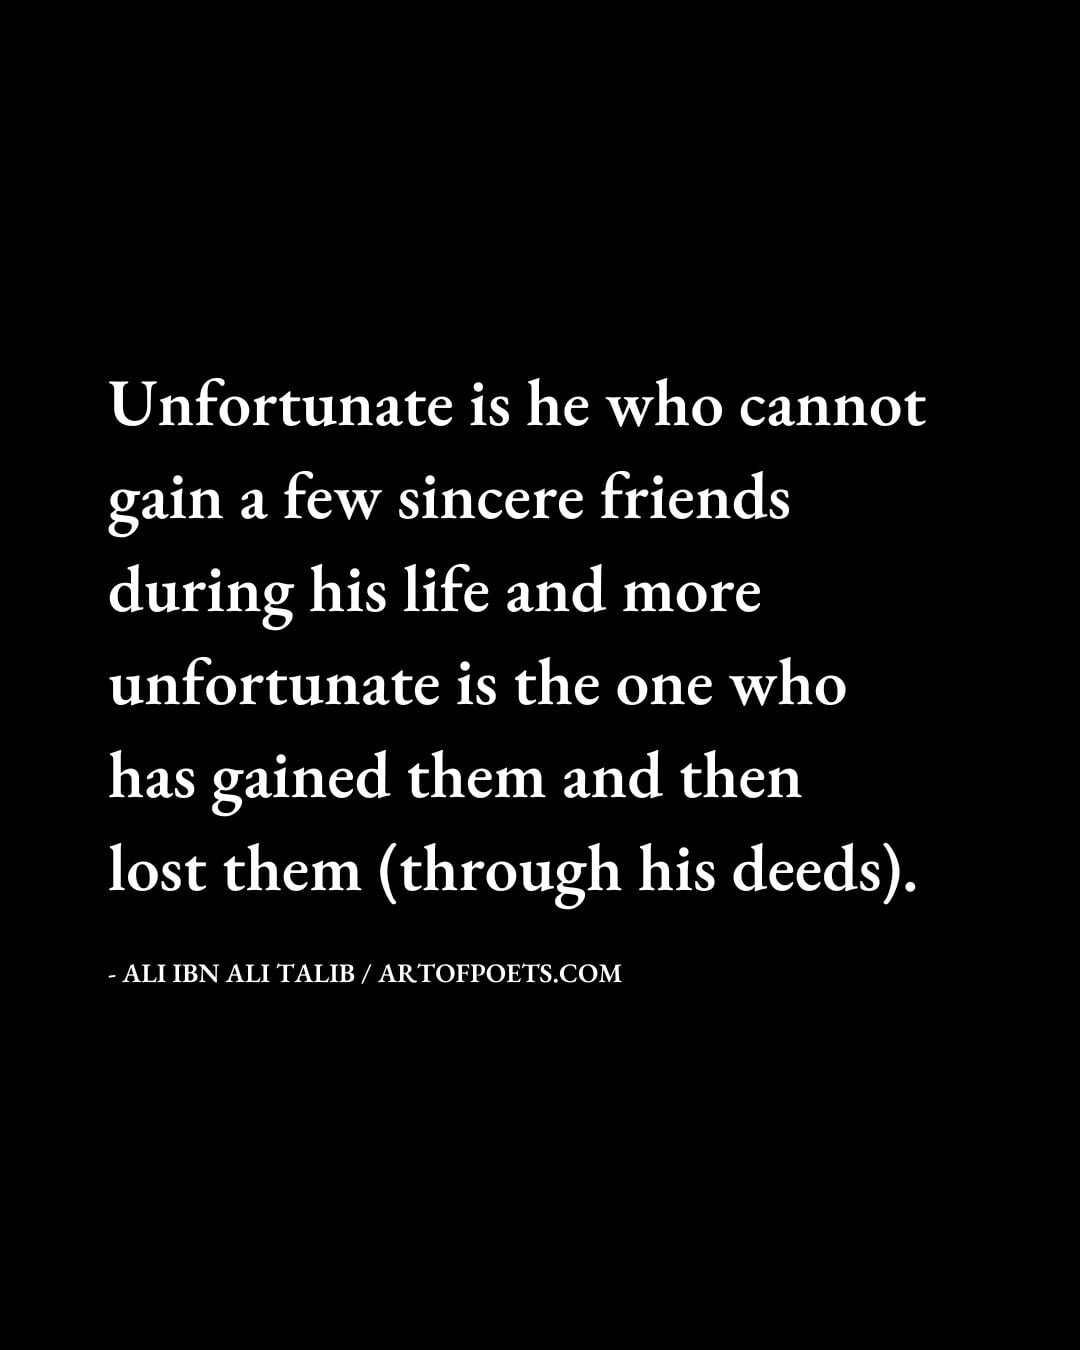 Unfortunate is he who cannot gain a few sincere friends during his life and more unfortunate is the one who has gained them and then lost them through his deeds